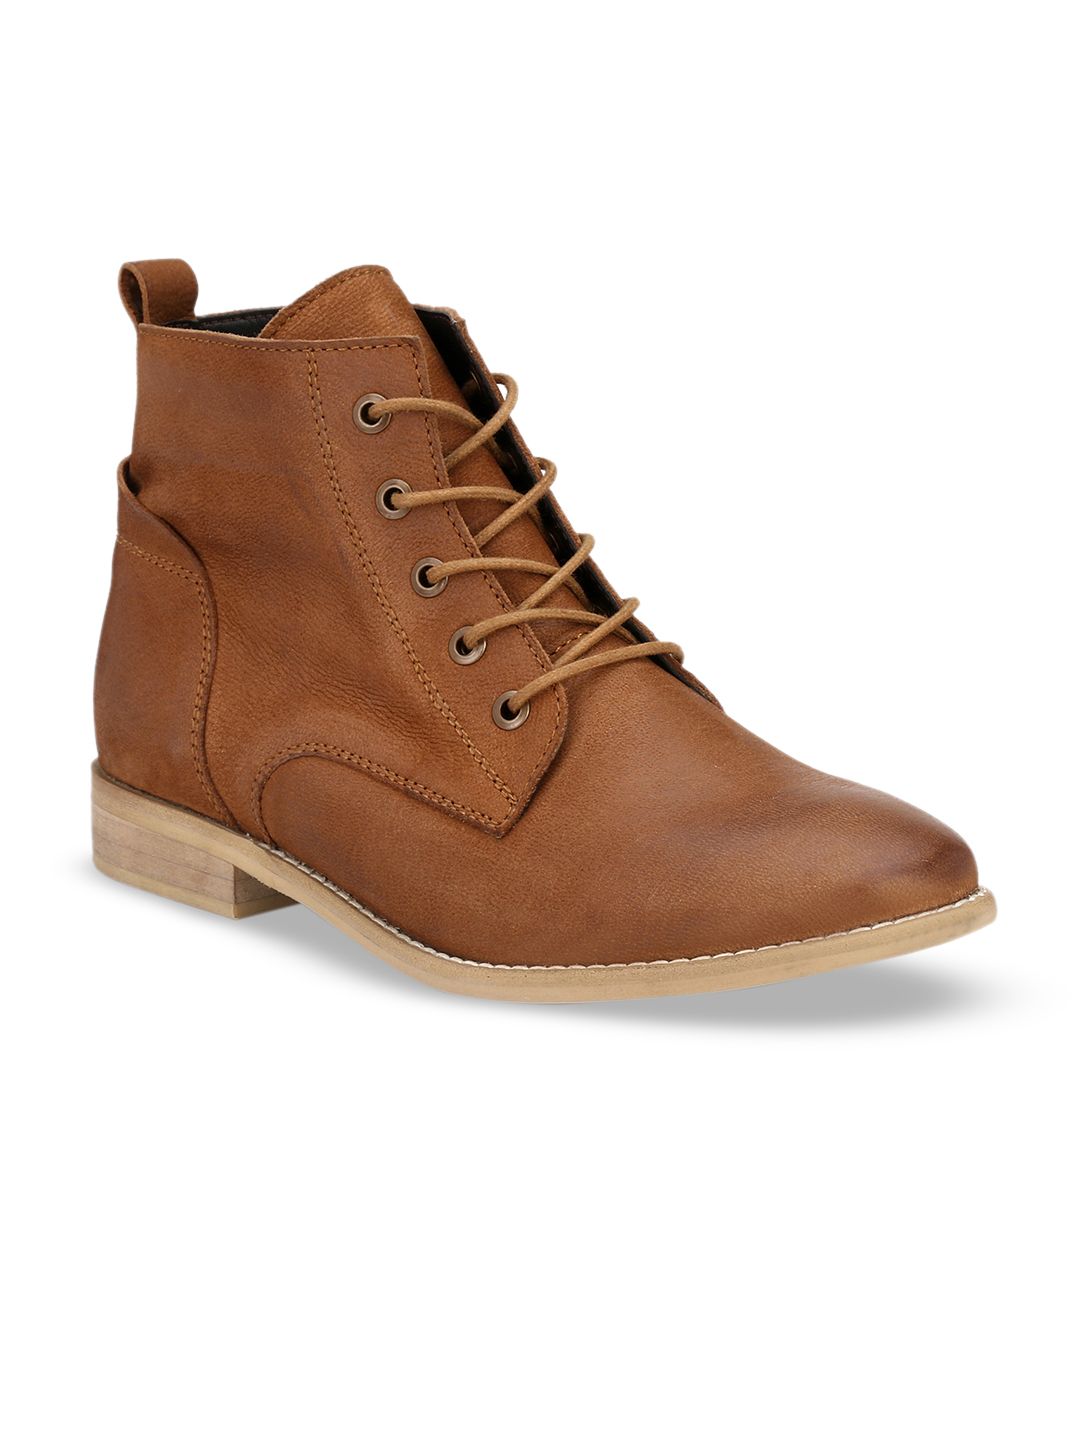 Alberto Torresi Women Tan Solid Leather High-Top Flat Boots Price in India